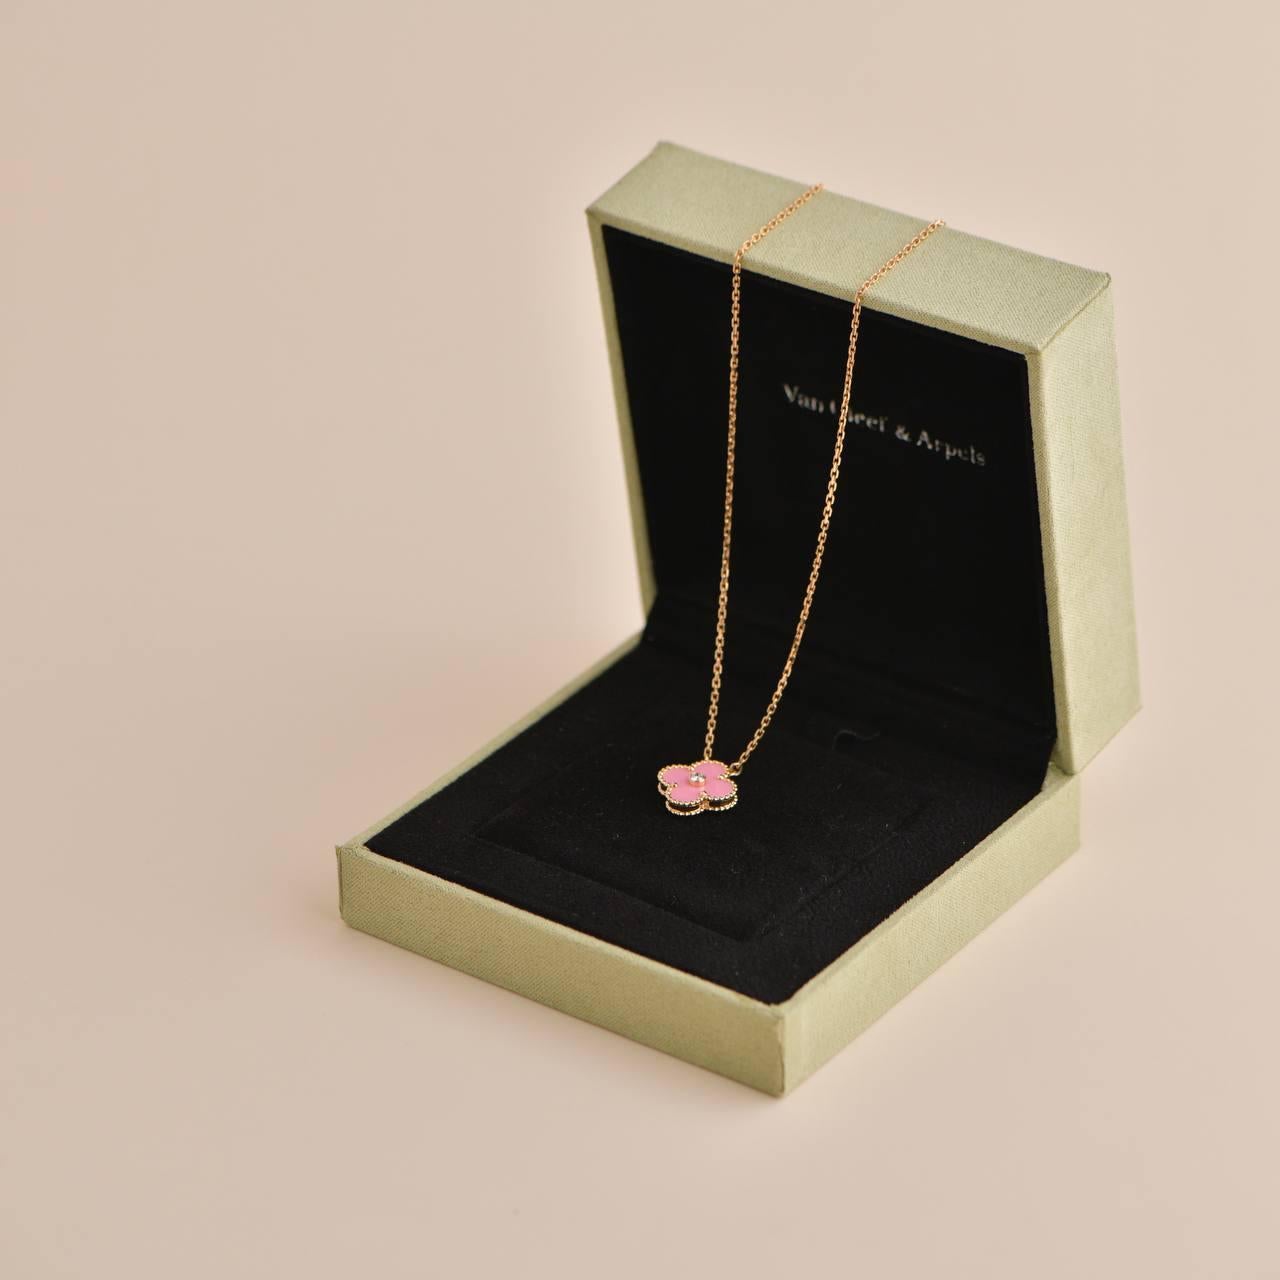 Limited edition released in 2015 as the holiday pendant, rhodonite stone, made in 18k rose gold, VCA doesn't create this version anymore, truly a collective piece!

SKU: AT-1769
Brand:  Van Cleef & Arpels
Model.  VCARO5SY00
Serial No. 